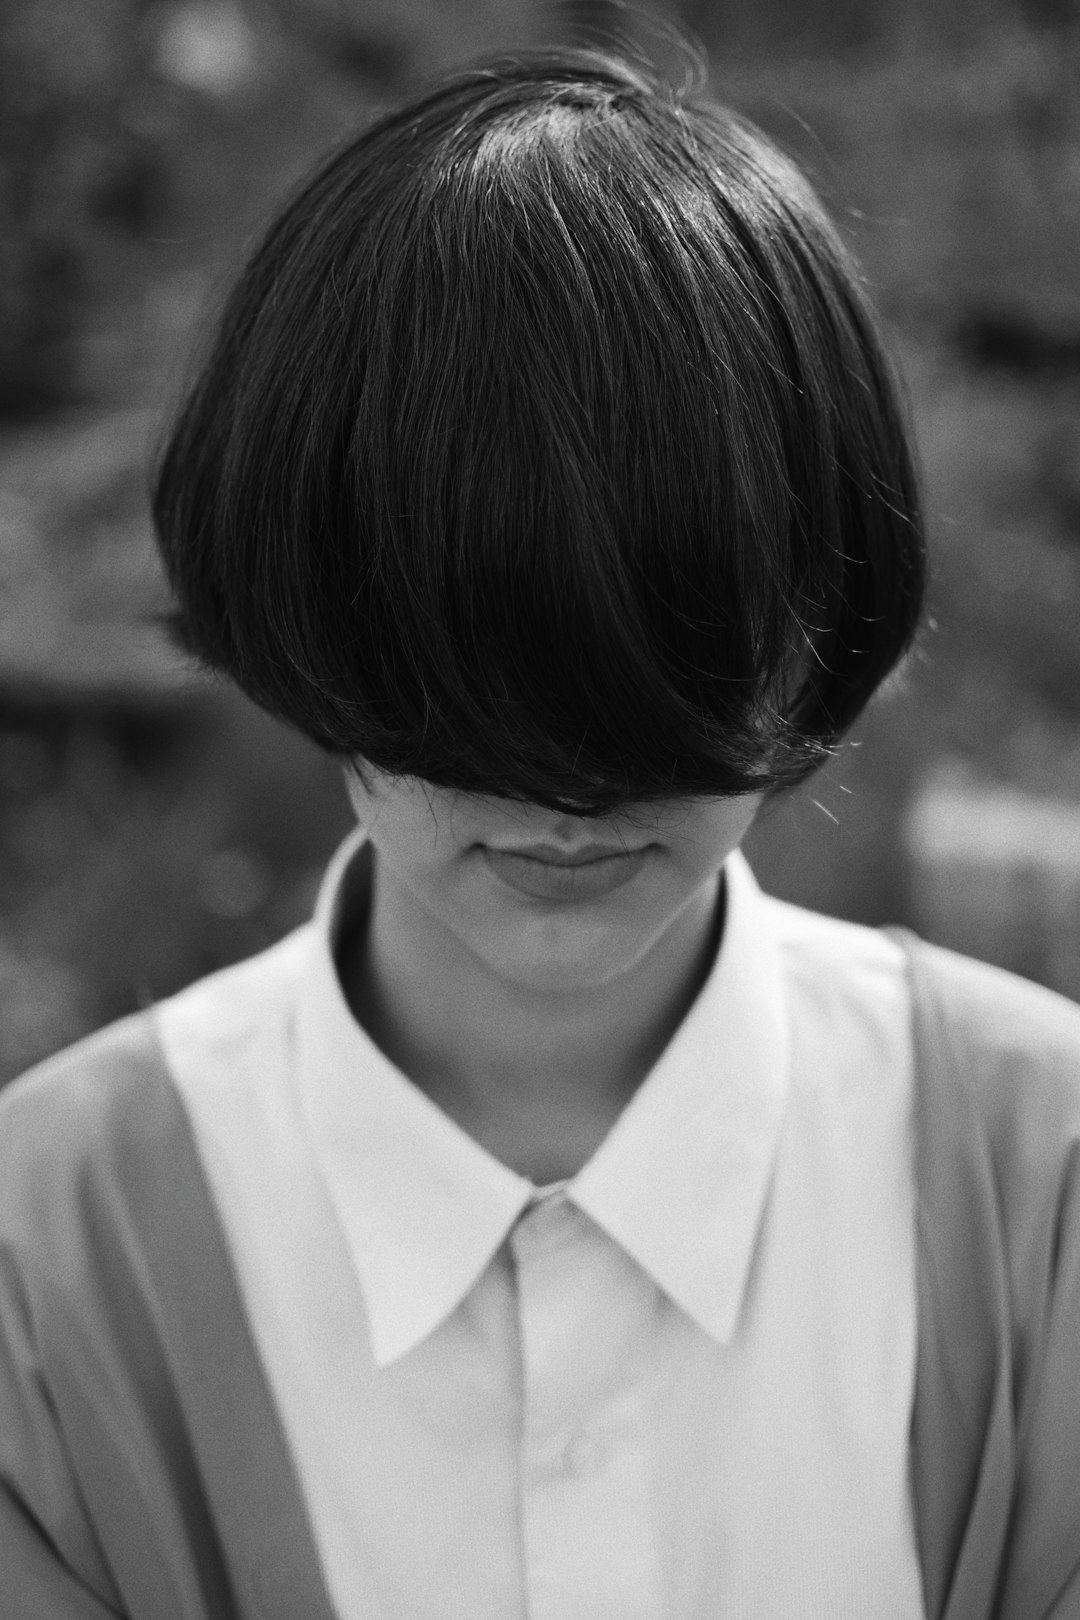 A black and white photo of an Asian woman with short hair wearing a shirt, looking down at the ground with her head tilted to one side. She has bangs that cover half or more of her face. The background is blurred, creating soft focus on her face. Shot in the style of Tadao C, she stands in front of some trees. Her expression appears sad but still confident as if it were something she had faced before. –ar 85:128